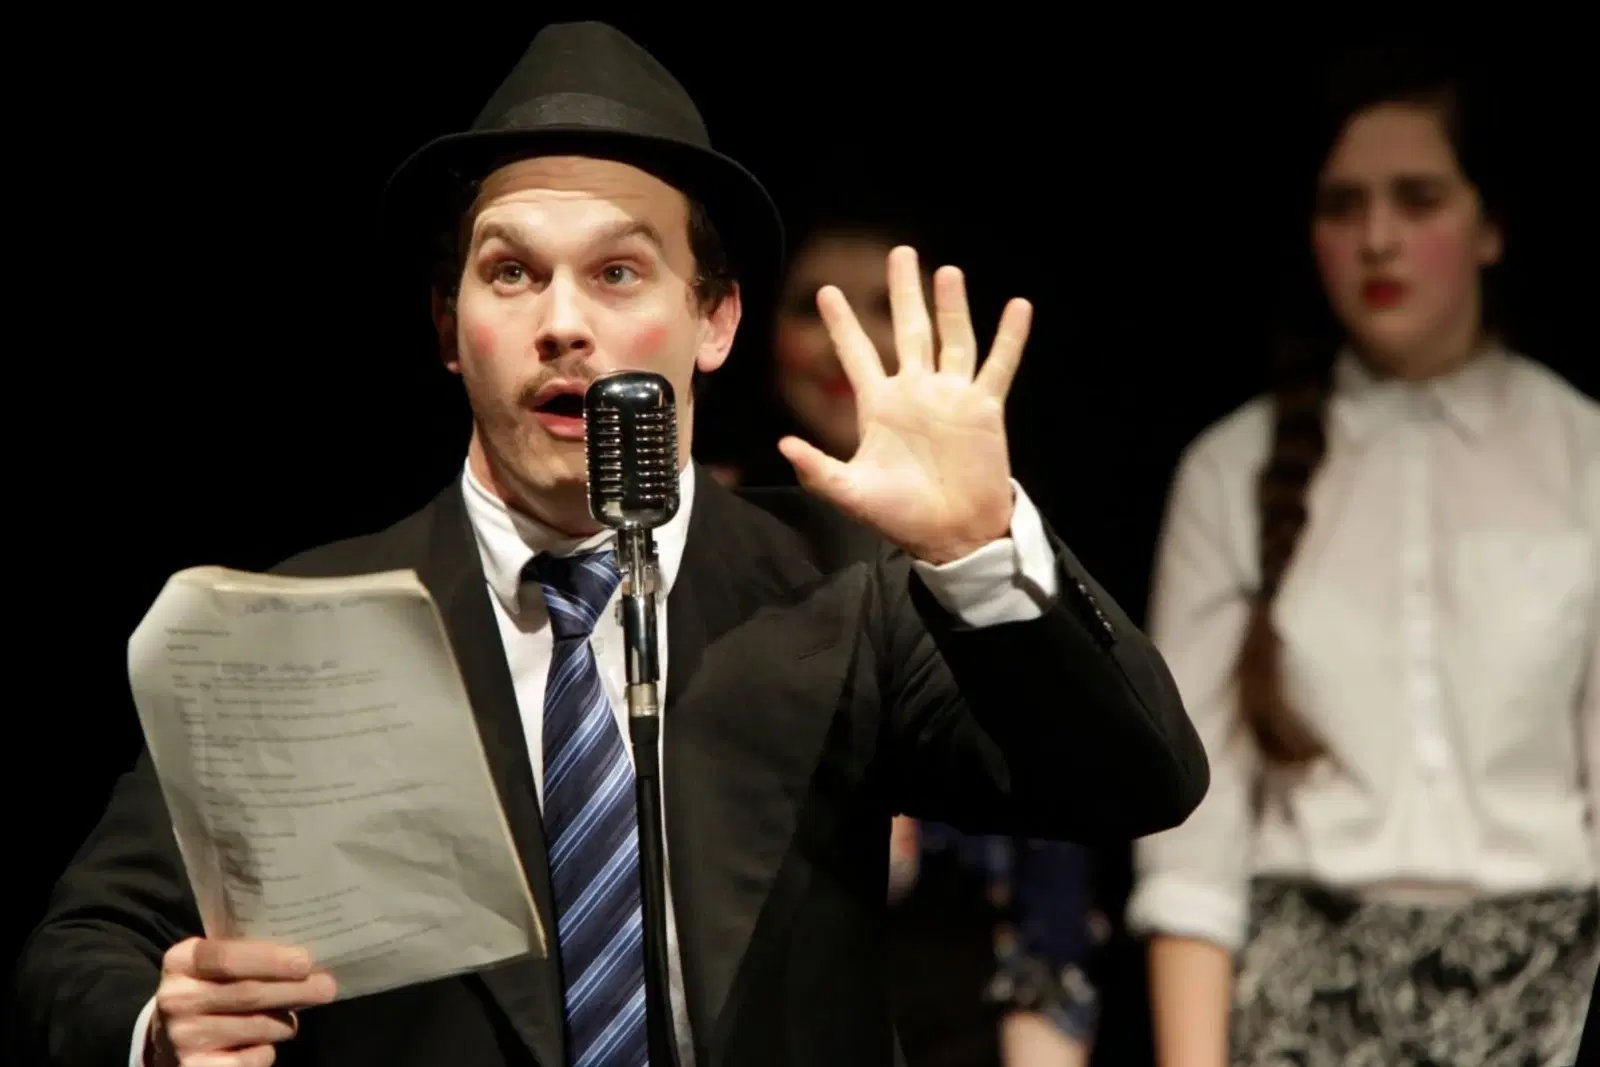 A performer in a black hat and suit gestures dramatically into a microphone while holding a script, with a focused actress in the background.